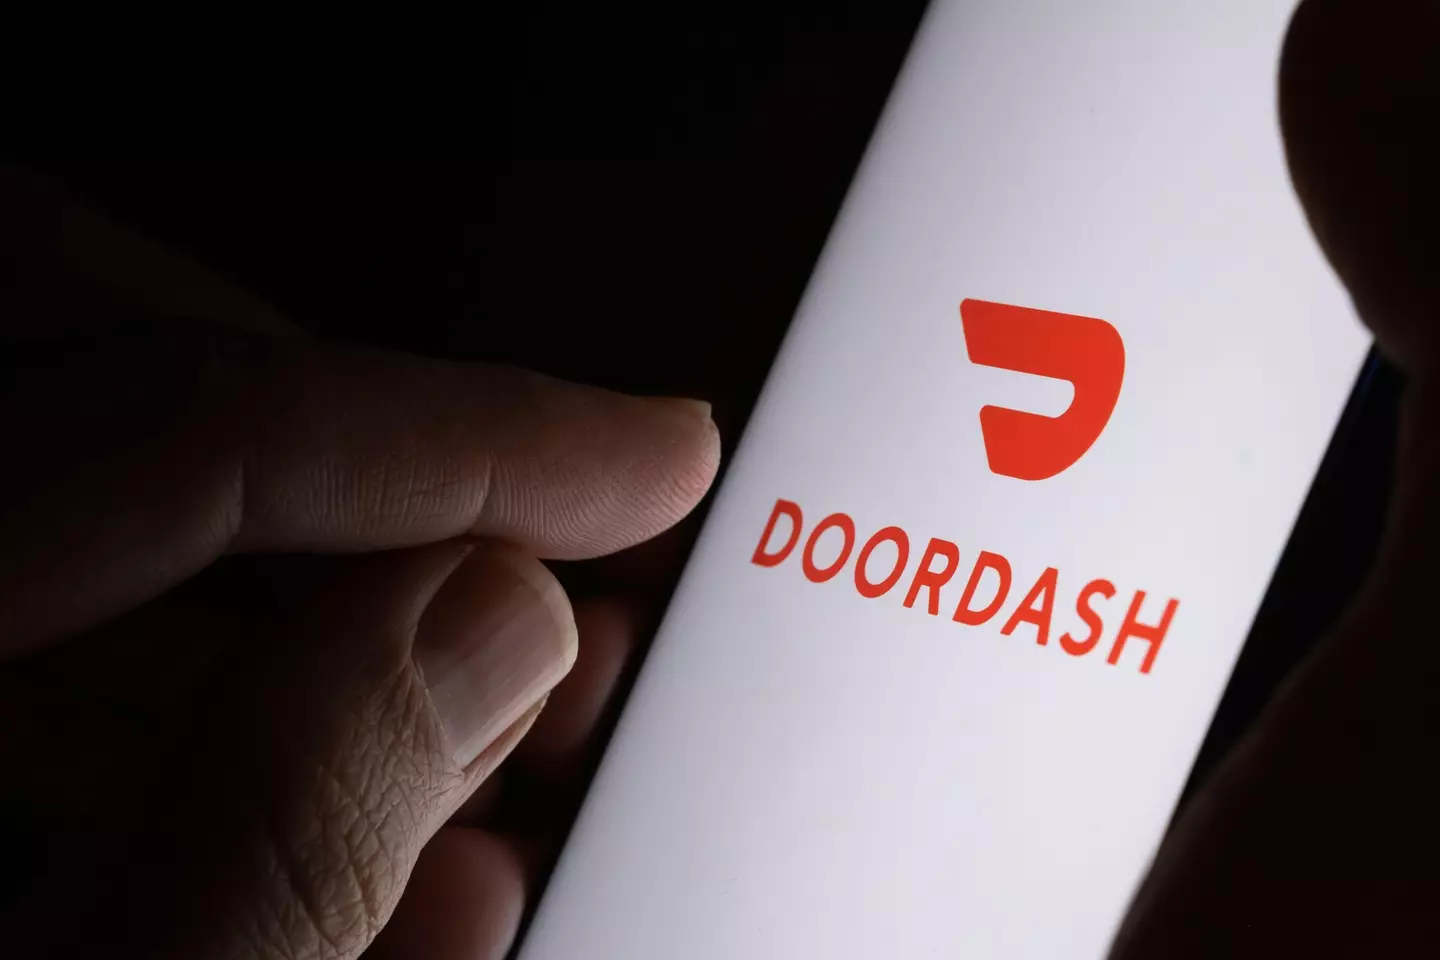 DoorDash responded to the man's complaint.